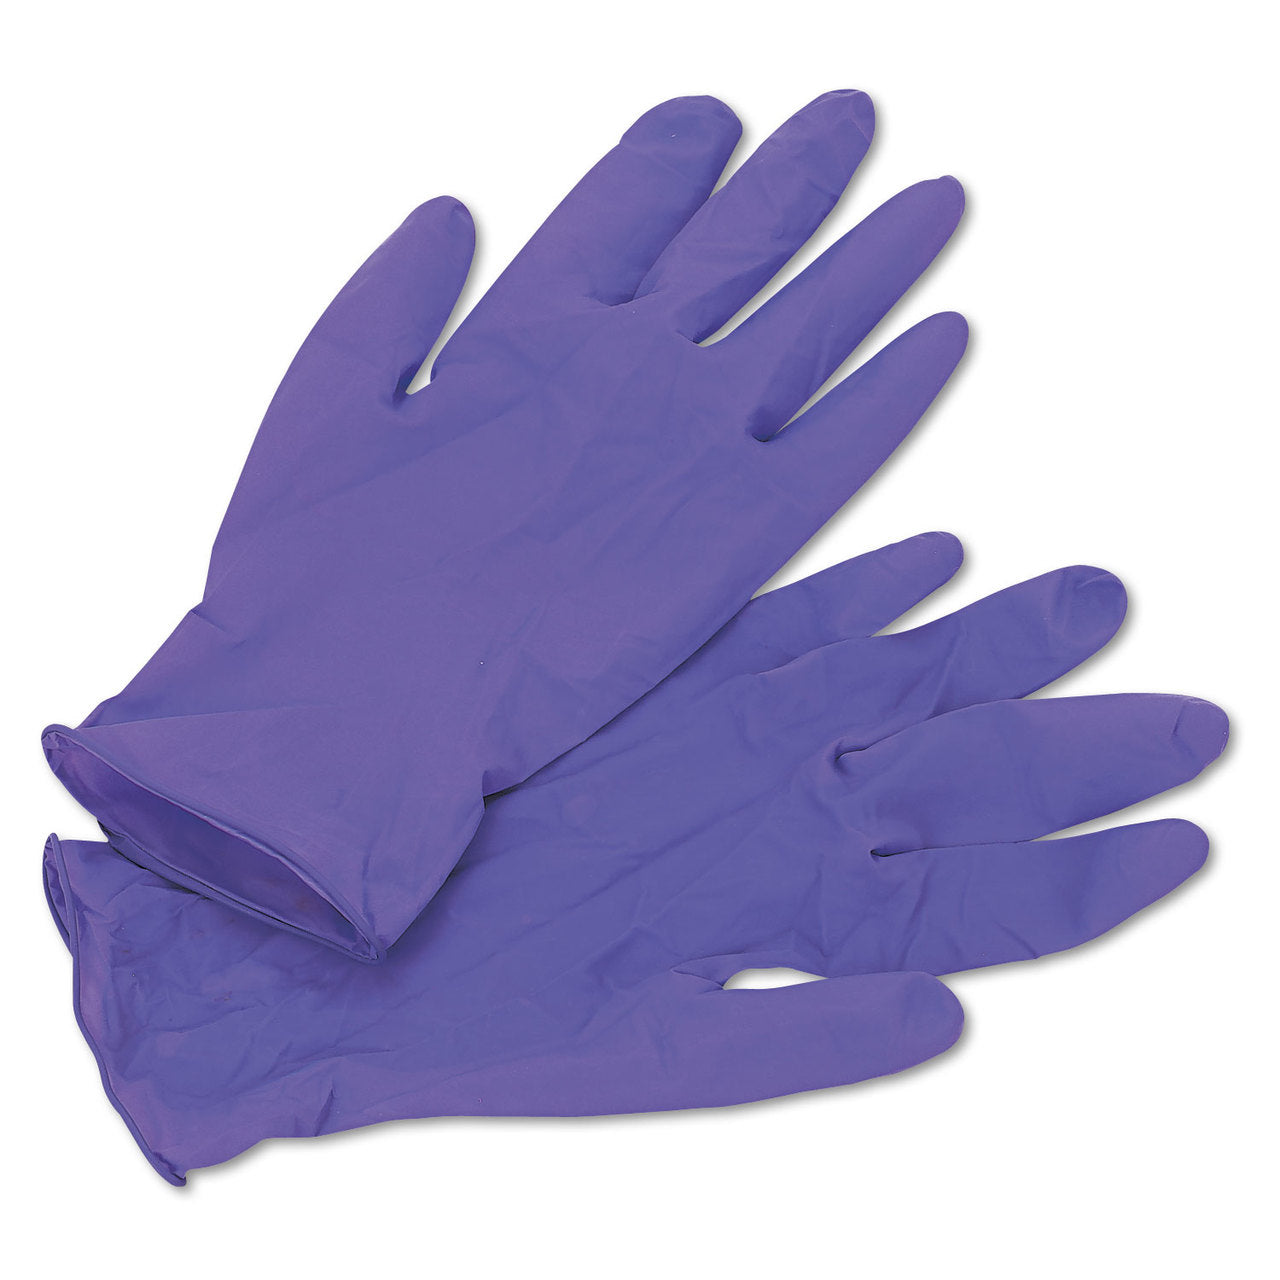 Kimberly Clark Purple Nitrile Disposable Gloves, (Box of 100)